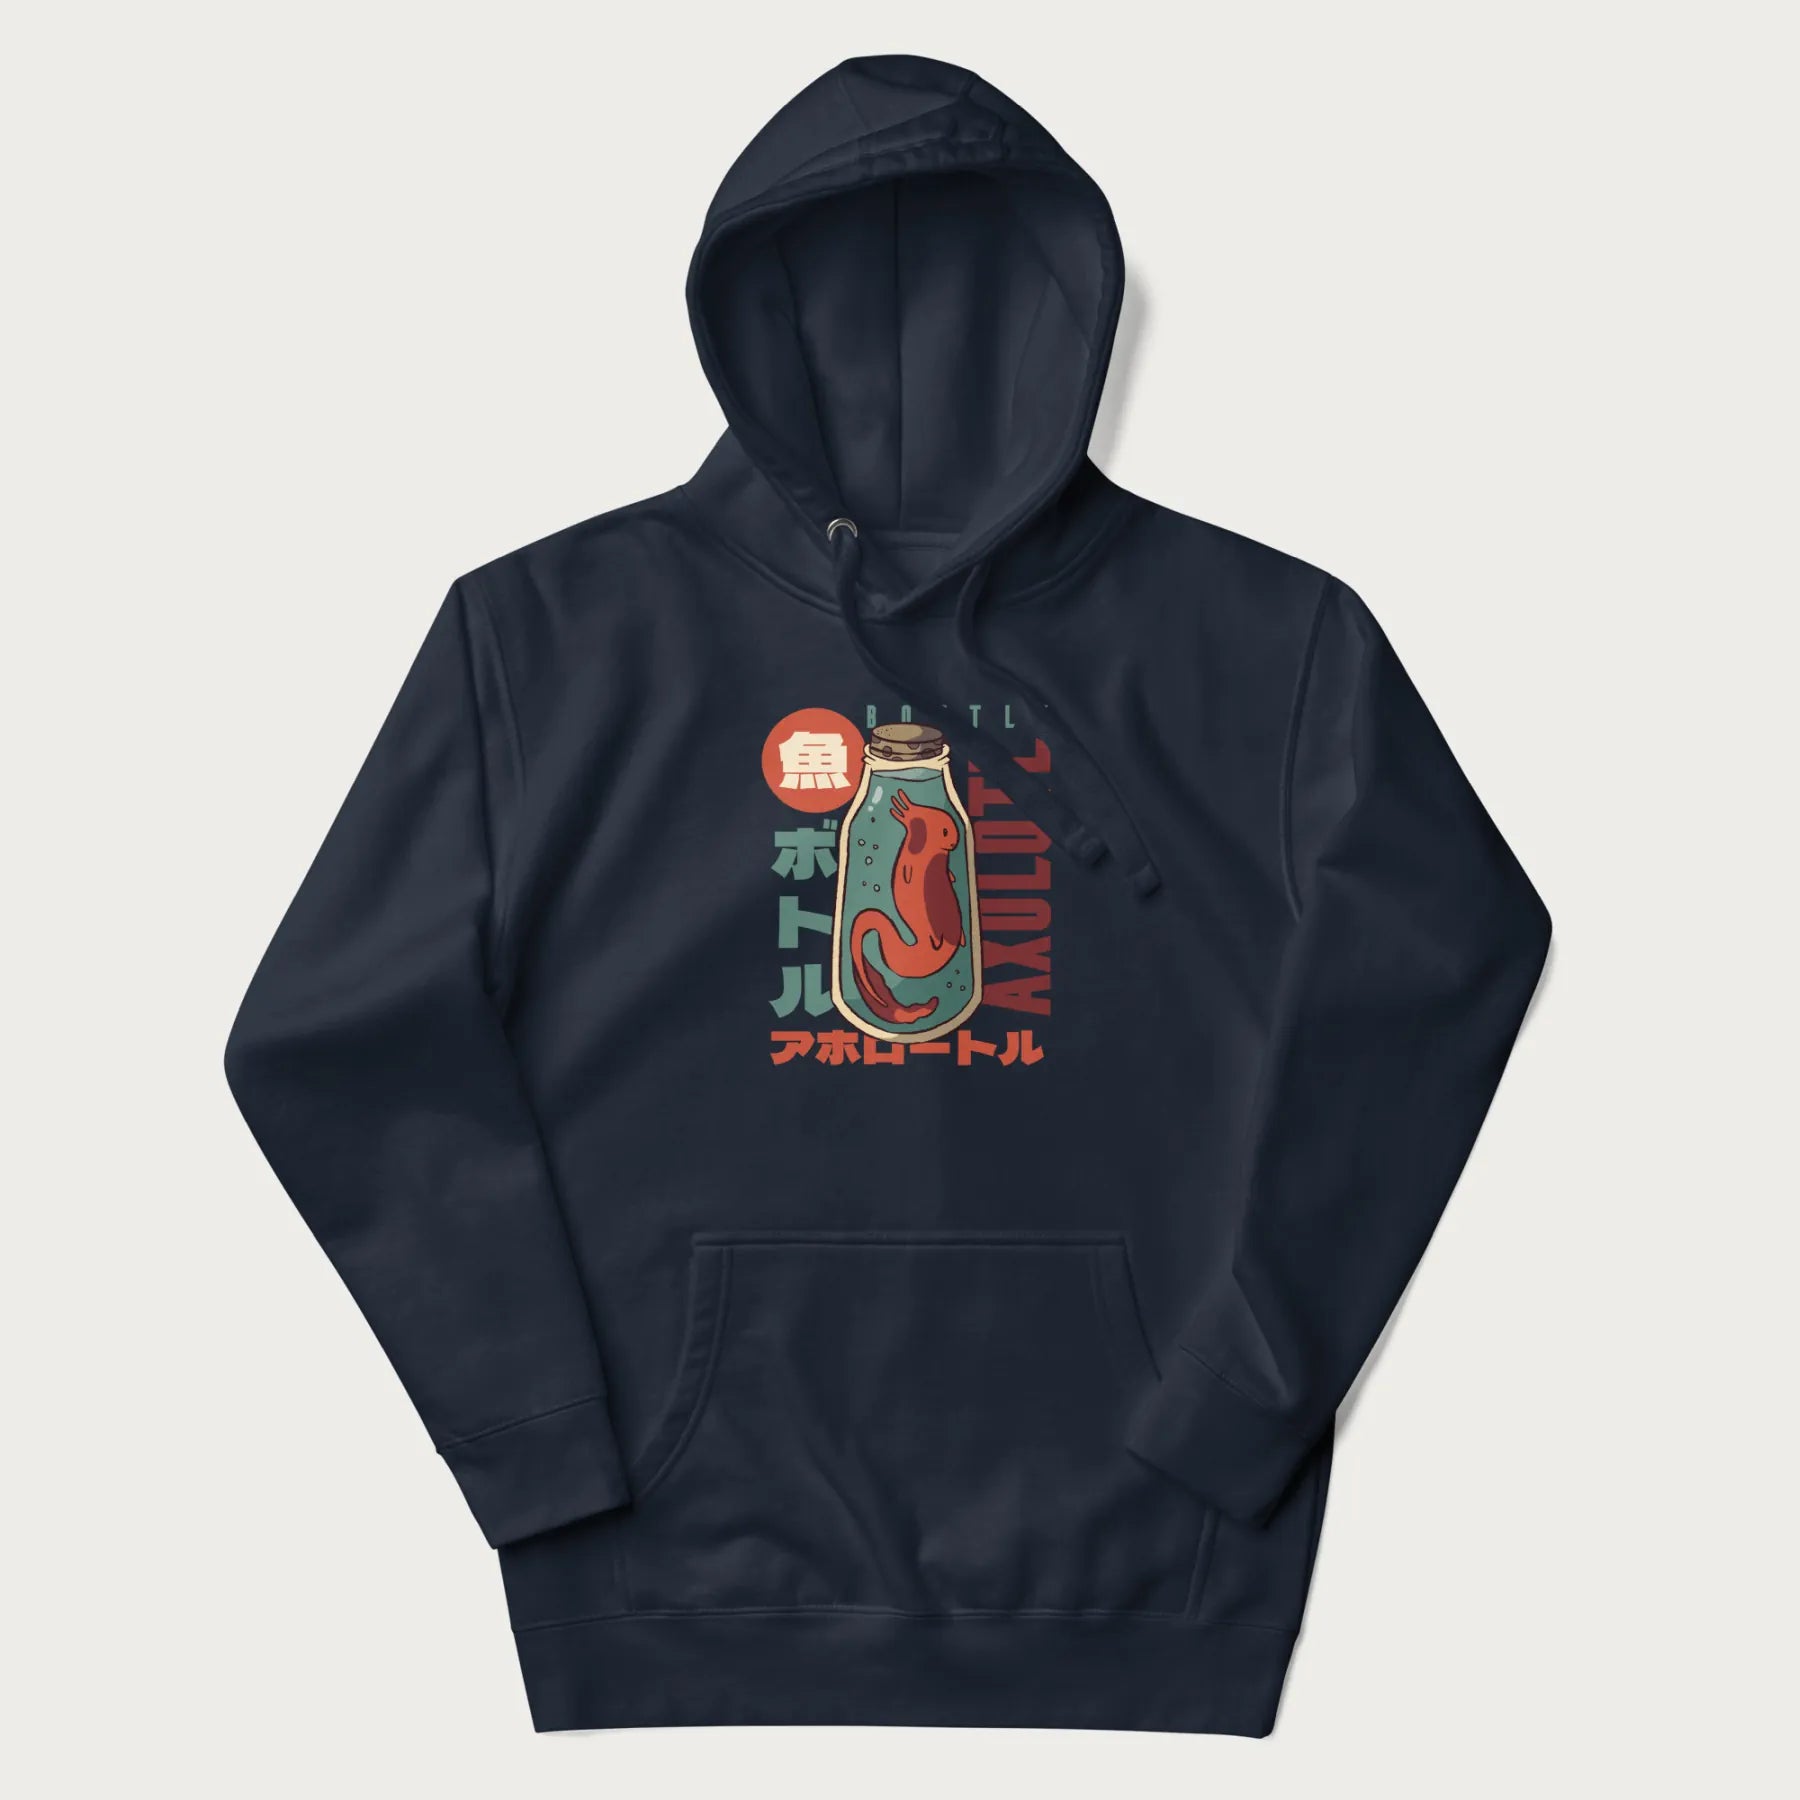 Navy blue hoodie with Japanese graphic of a red axolotl in a bottle with Japanese text 'ボトル' (Bottle) and 'アホロートル' (Axolotl).